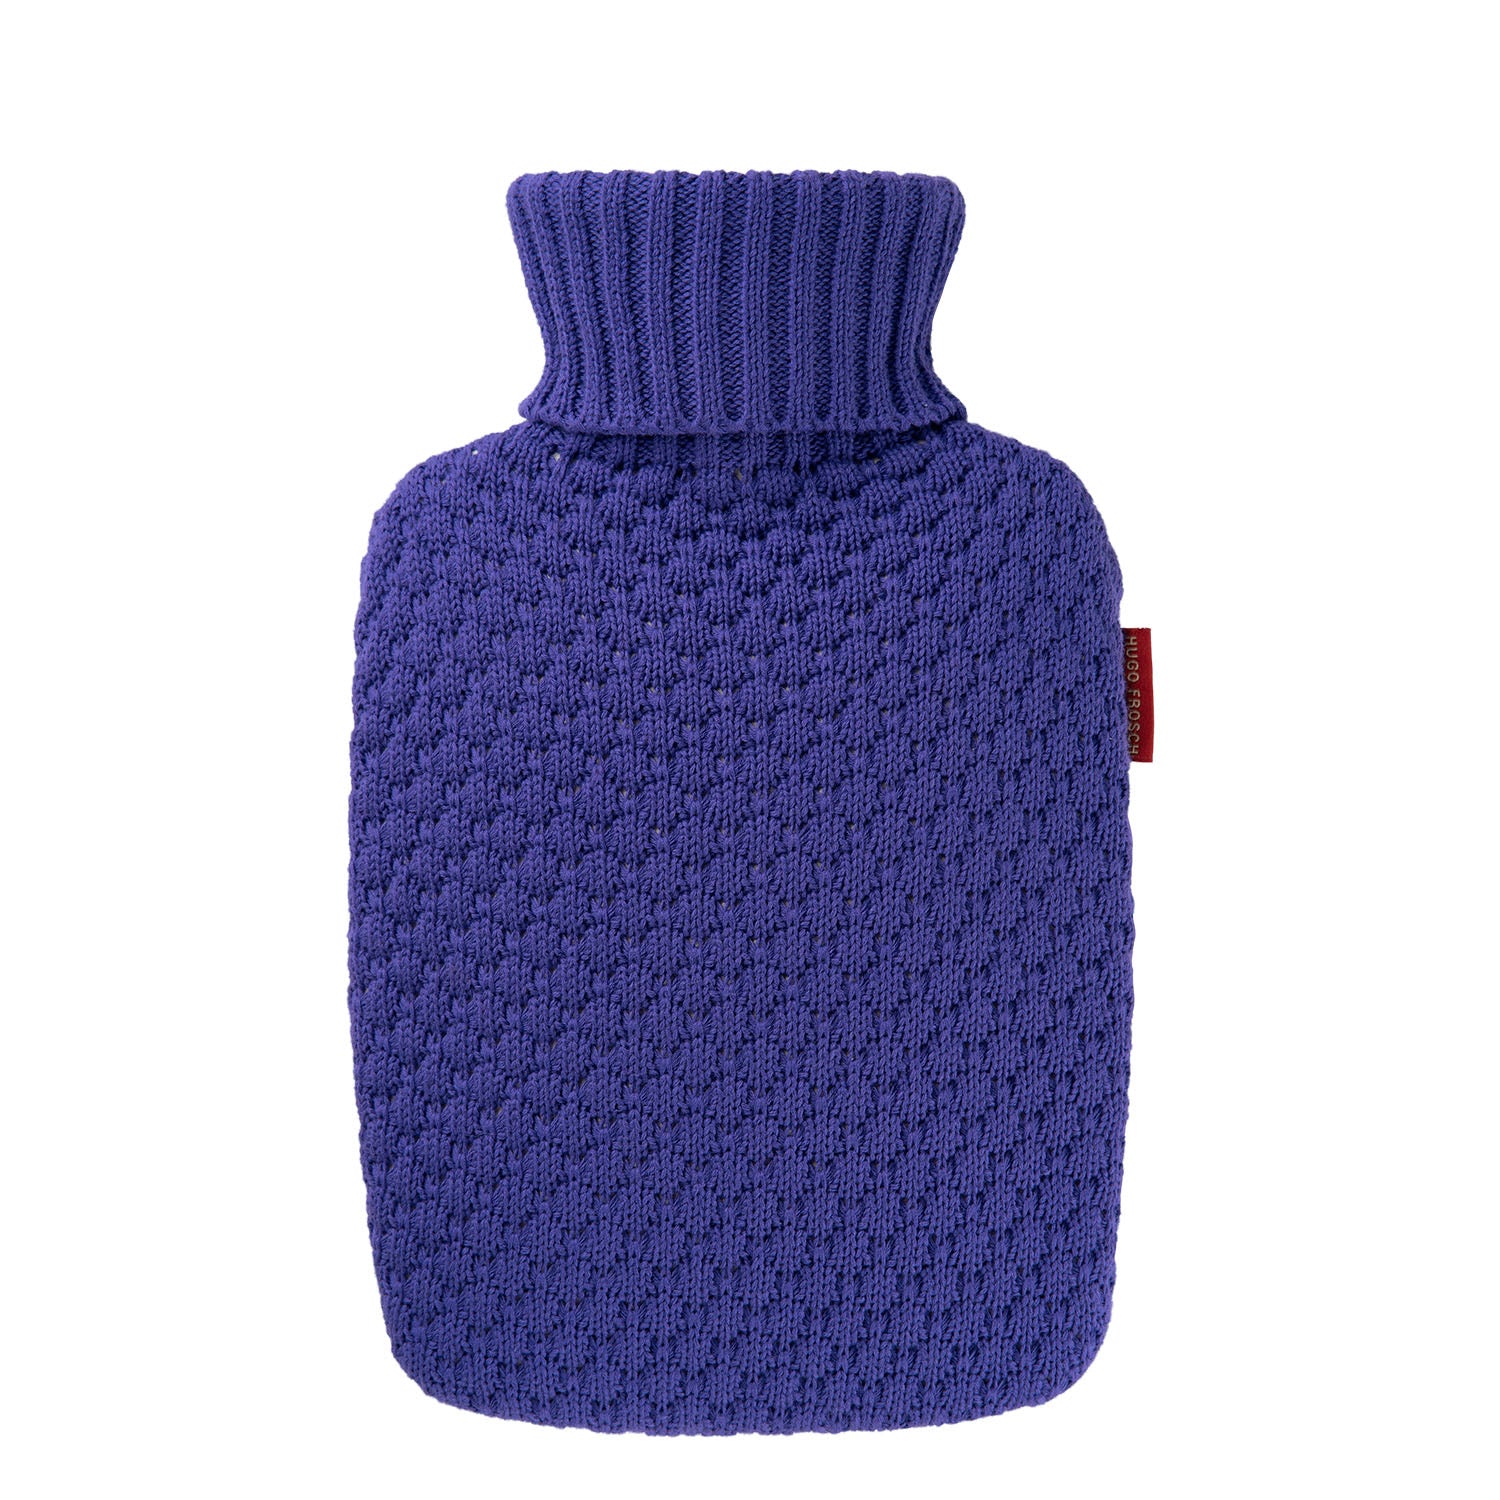 1.8 Litre Classic Plant Based Hot Water Bottle with Blueberry Knit Organic Cotton Cover (rubberless)